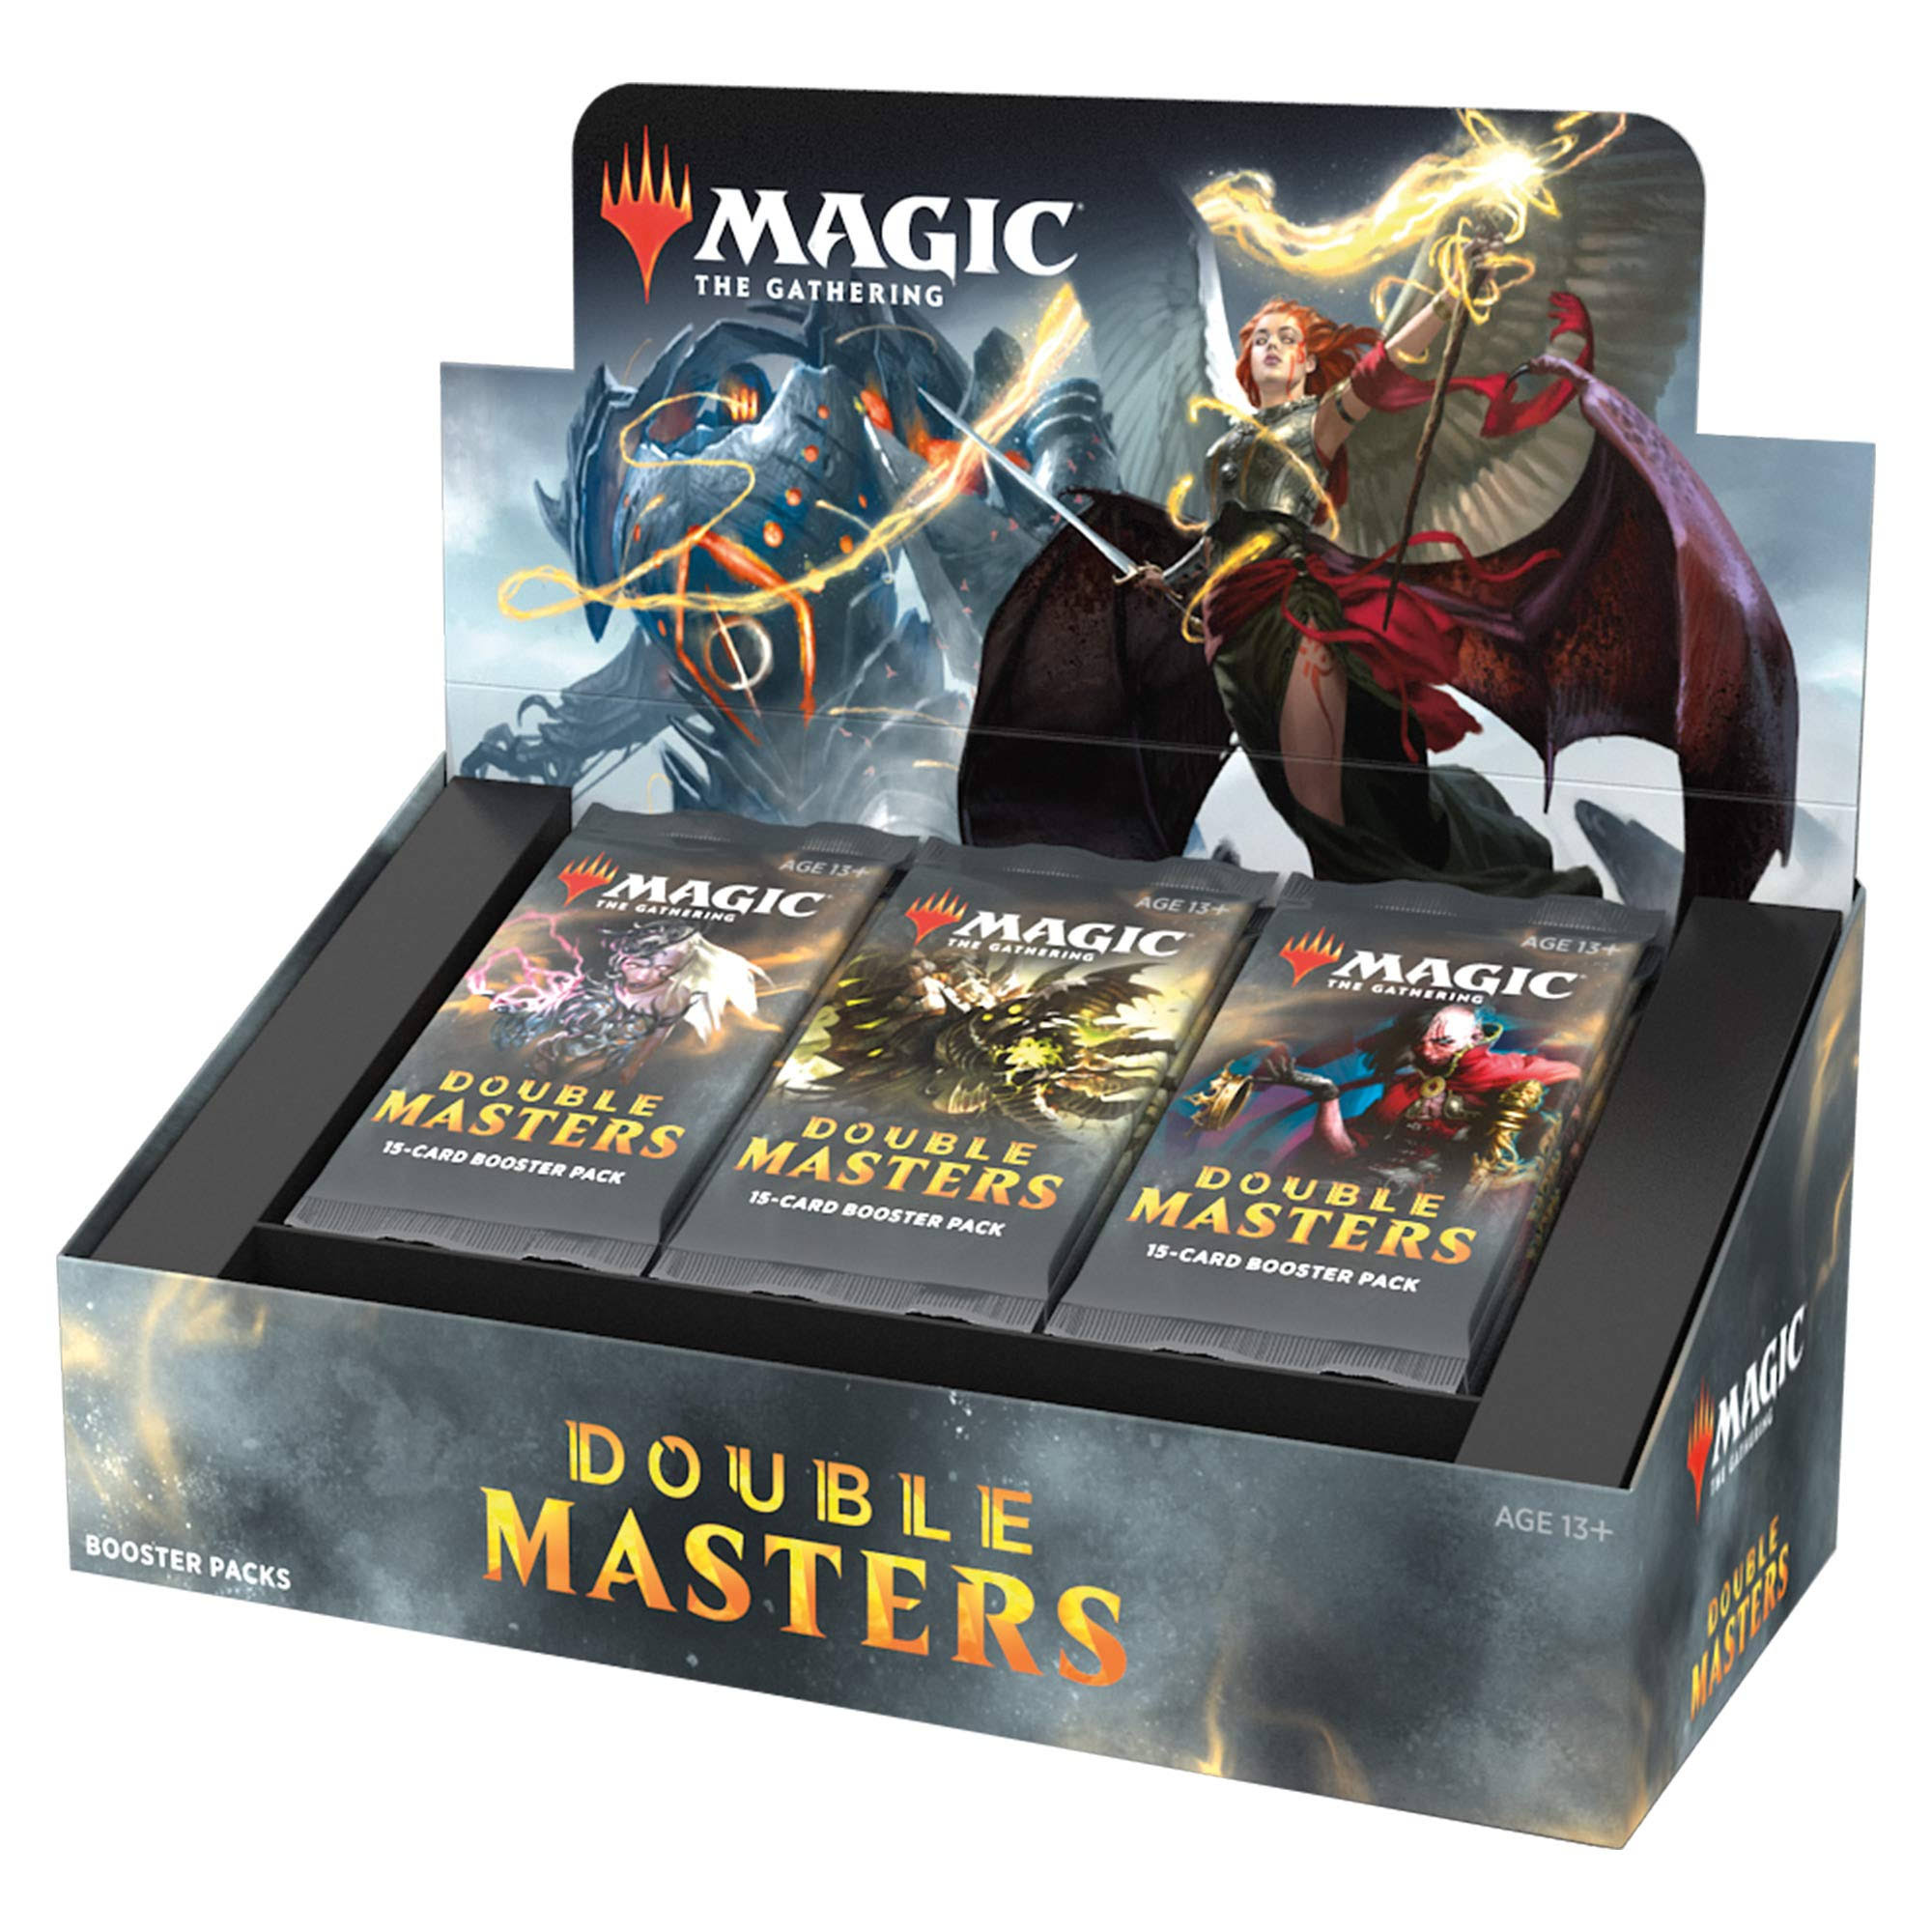 Magic: The Gathering Booster Box - DOUBLE MASTERS